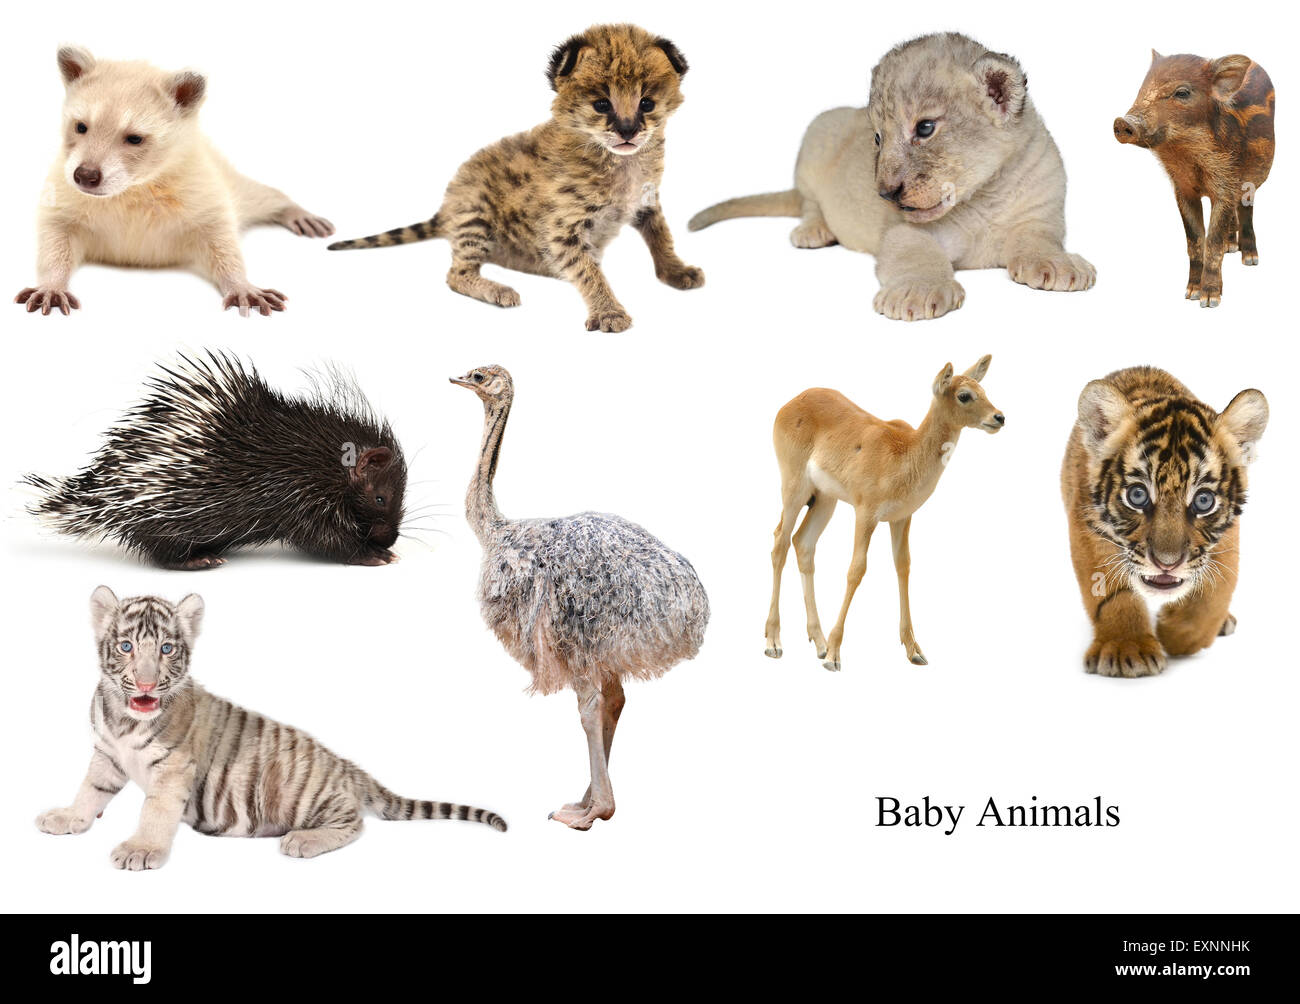 baby animals collection isolated on white background Stock Photo